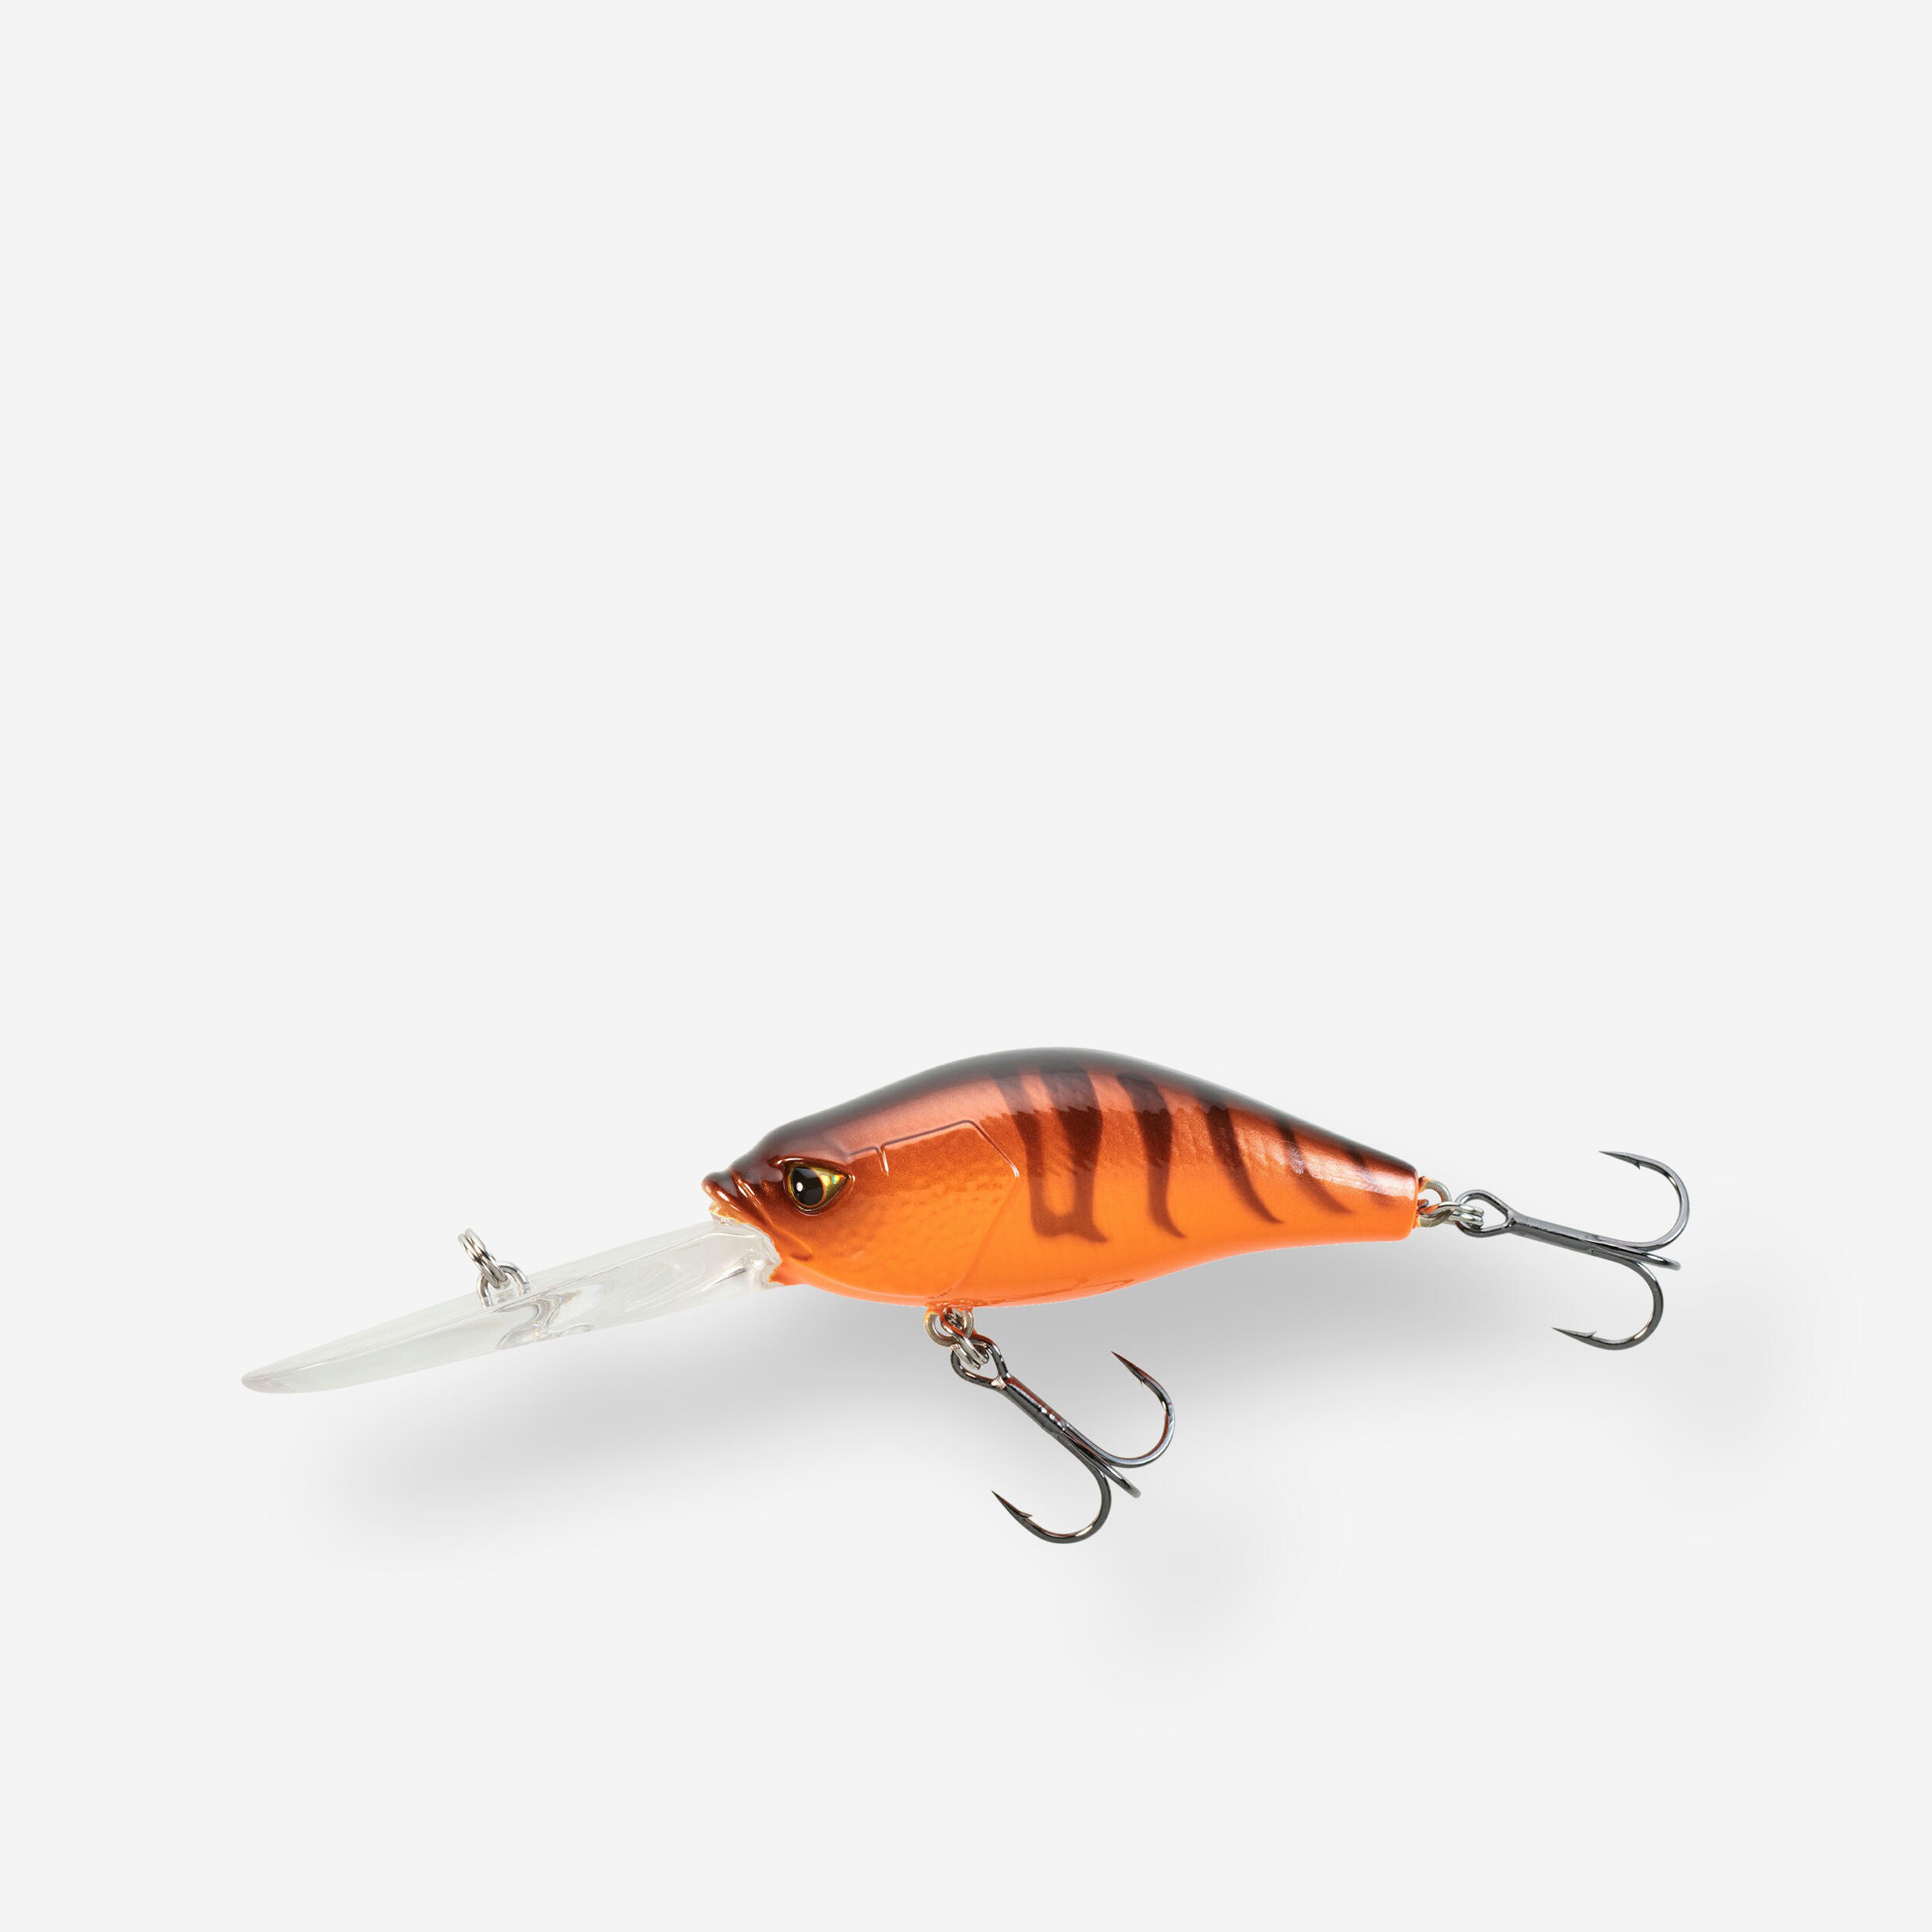 4inch 29g Jointed Sunfish Lures Bait Crank Bait Fishing Tackle Bait Carbon  Fiber Bill Customzied Wake Gill Bait